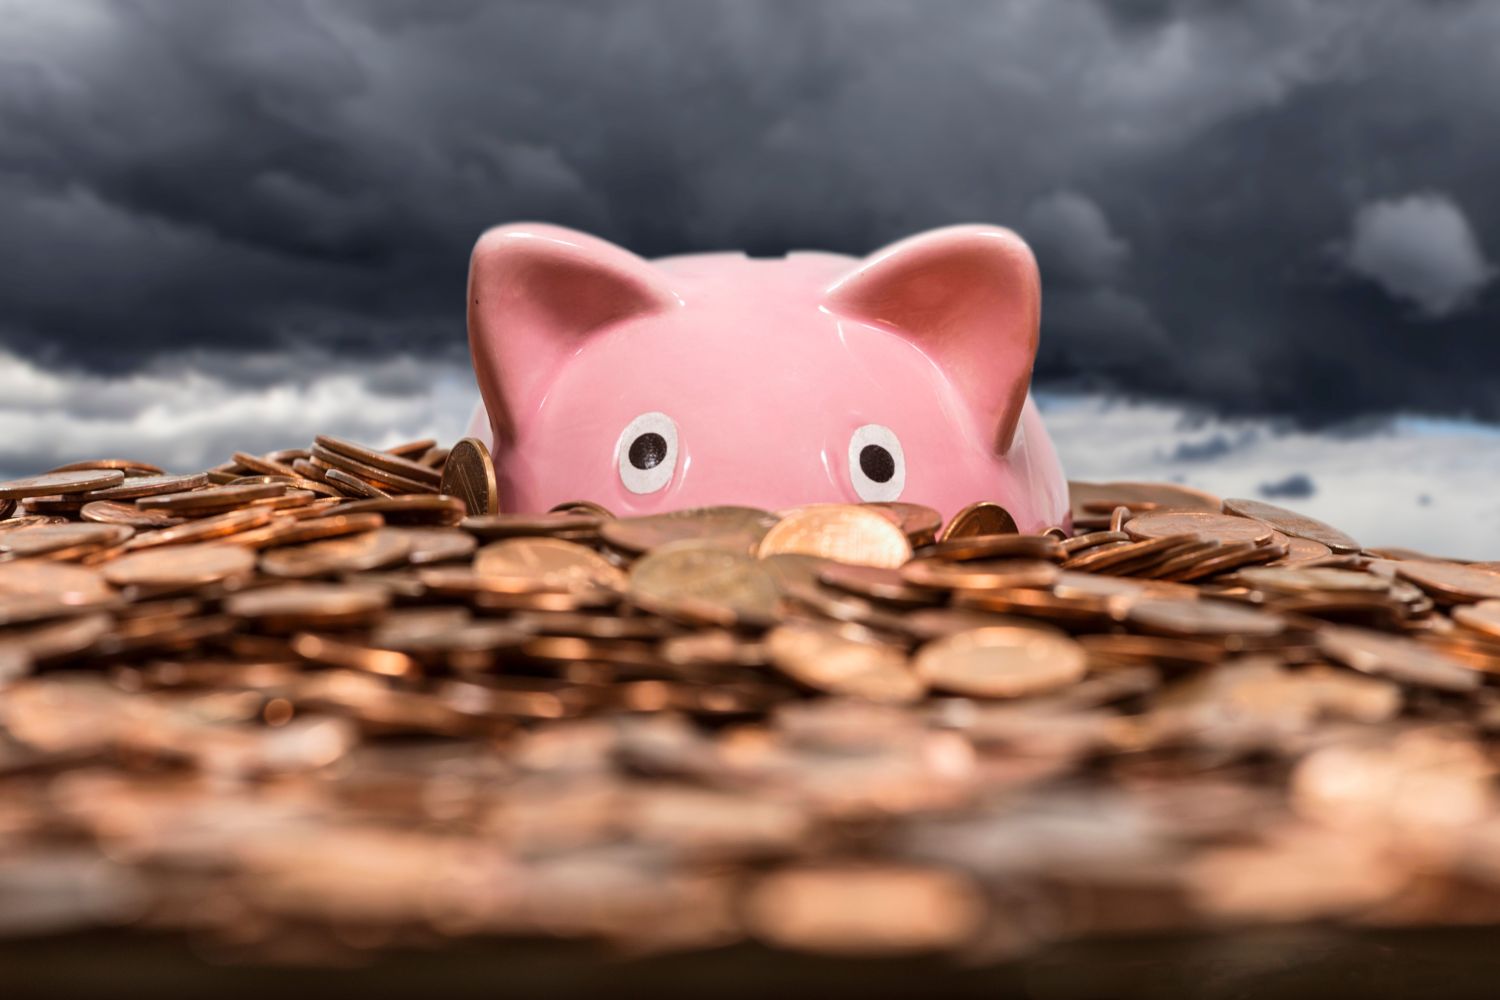 Piggy bank in an ocean of coins with gathering storm clouds in the background.